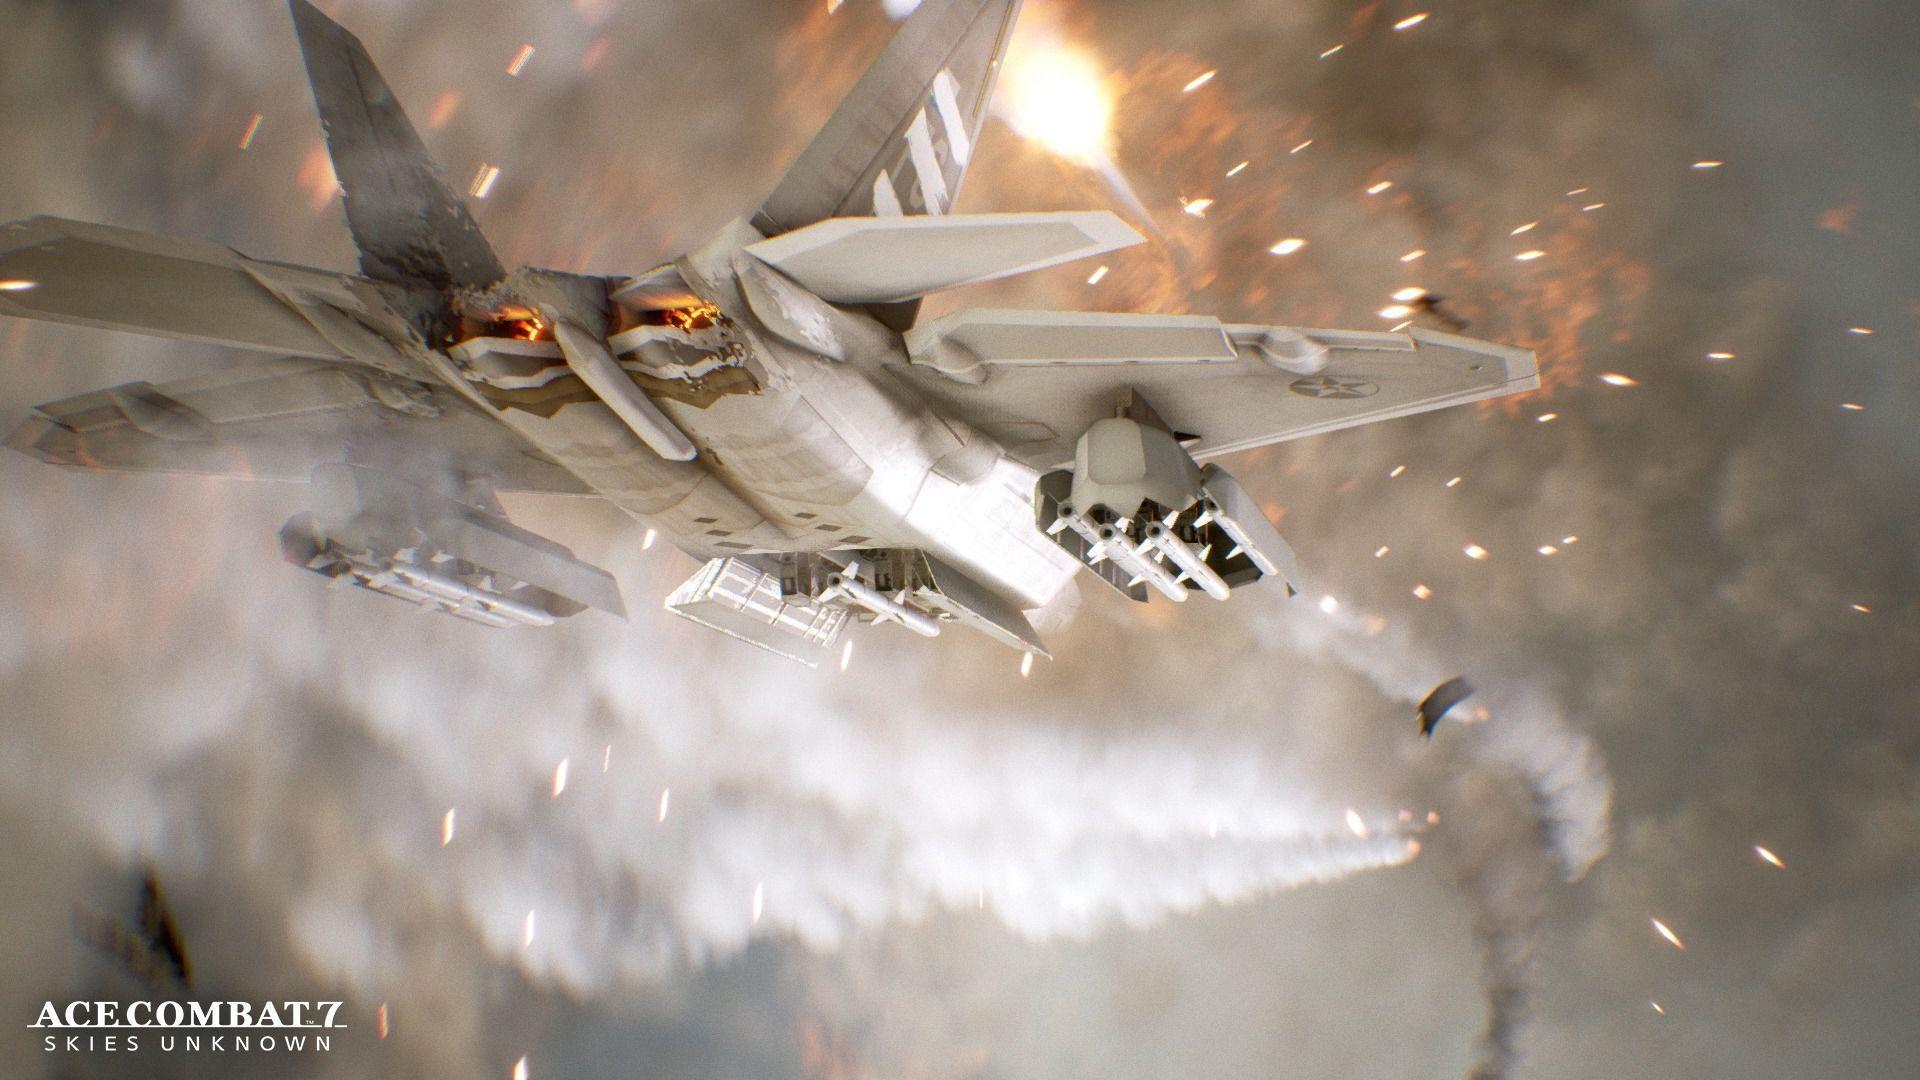 4K HDR Ace Combat 7 Wallpaper You Need to Make Your Desktop Background